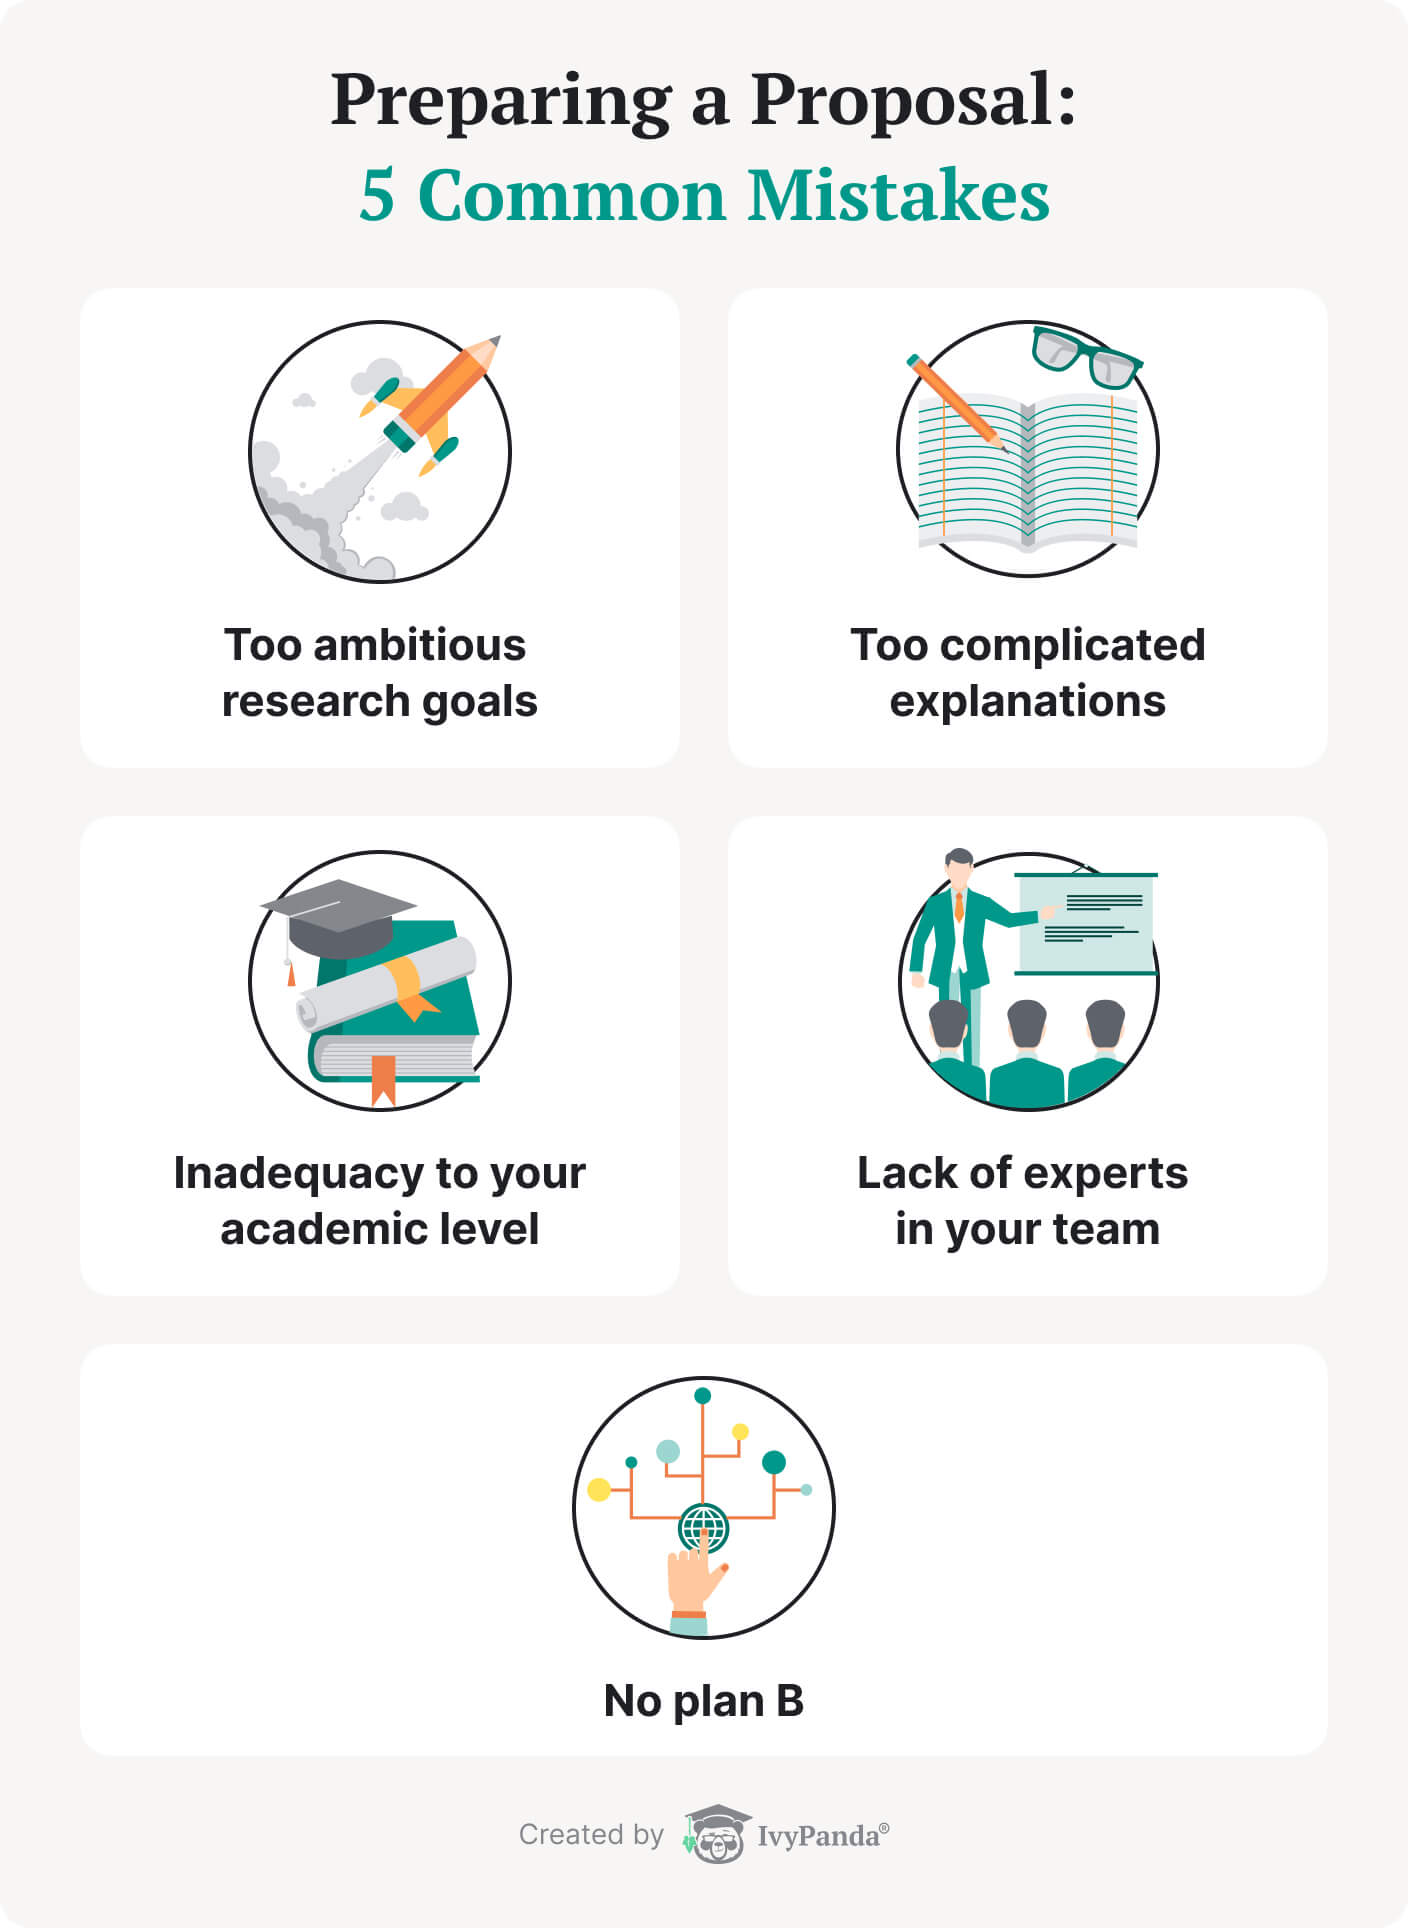 The picture contains 5 mistakes made by researchers when applying for grants.